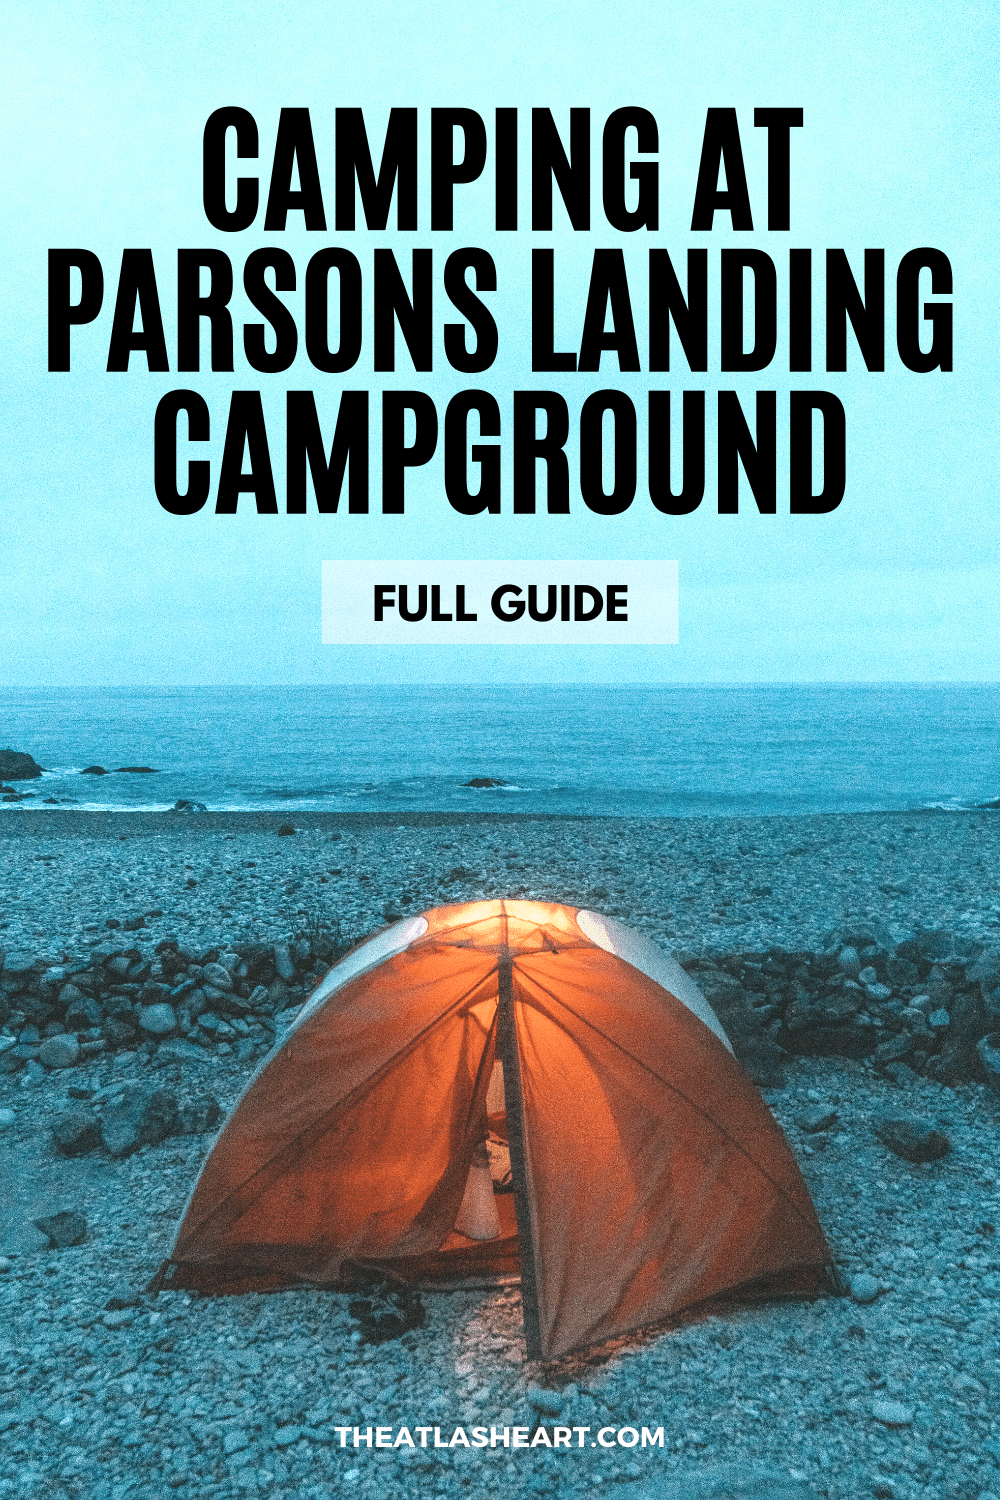 Camping at Parsons Landing Campground (Full Guide)